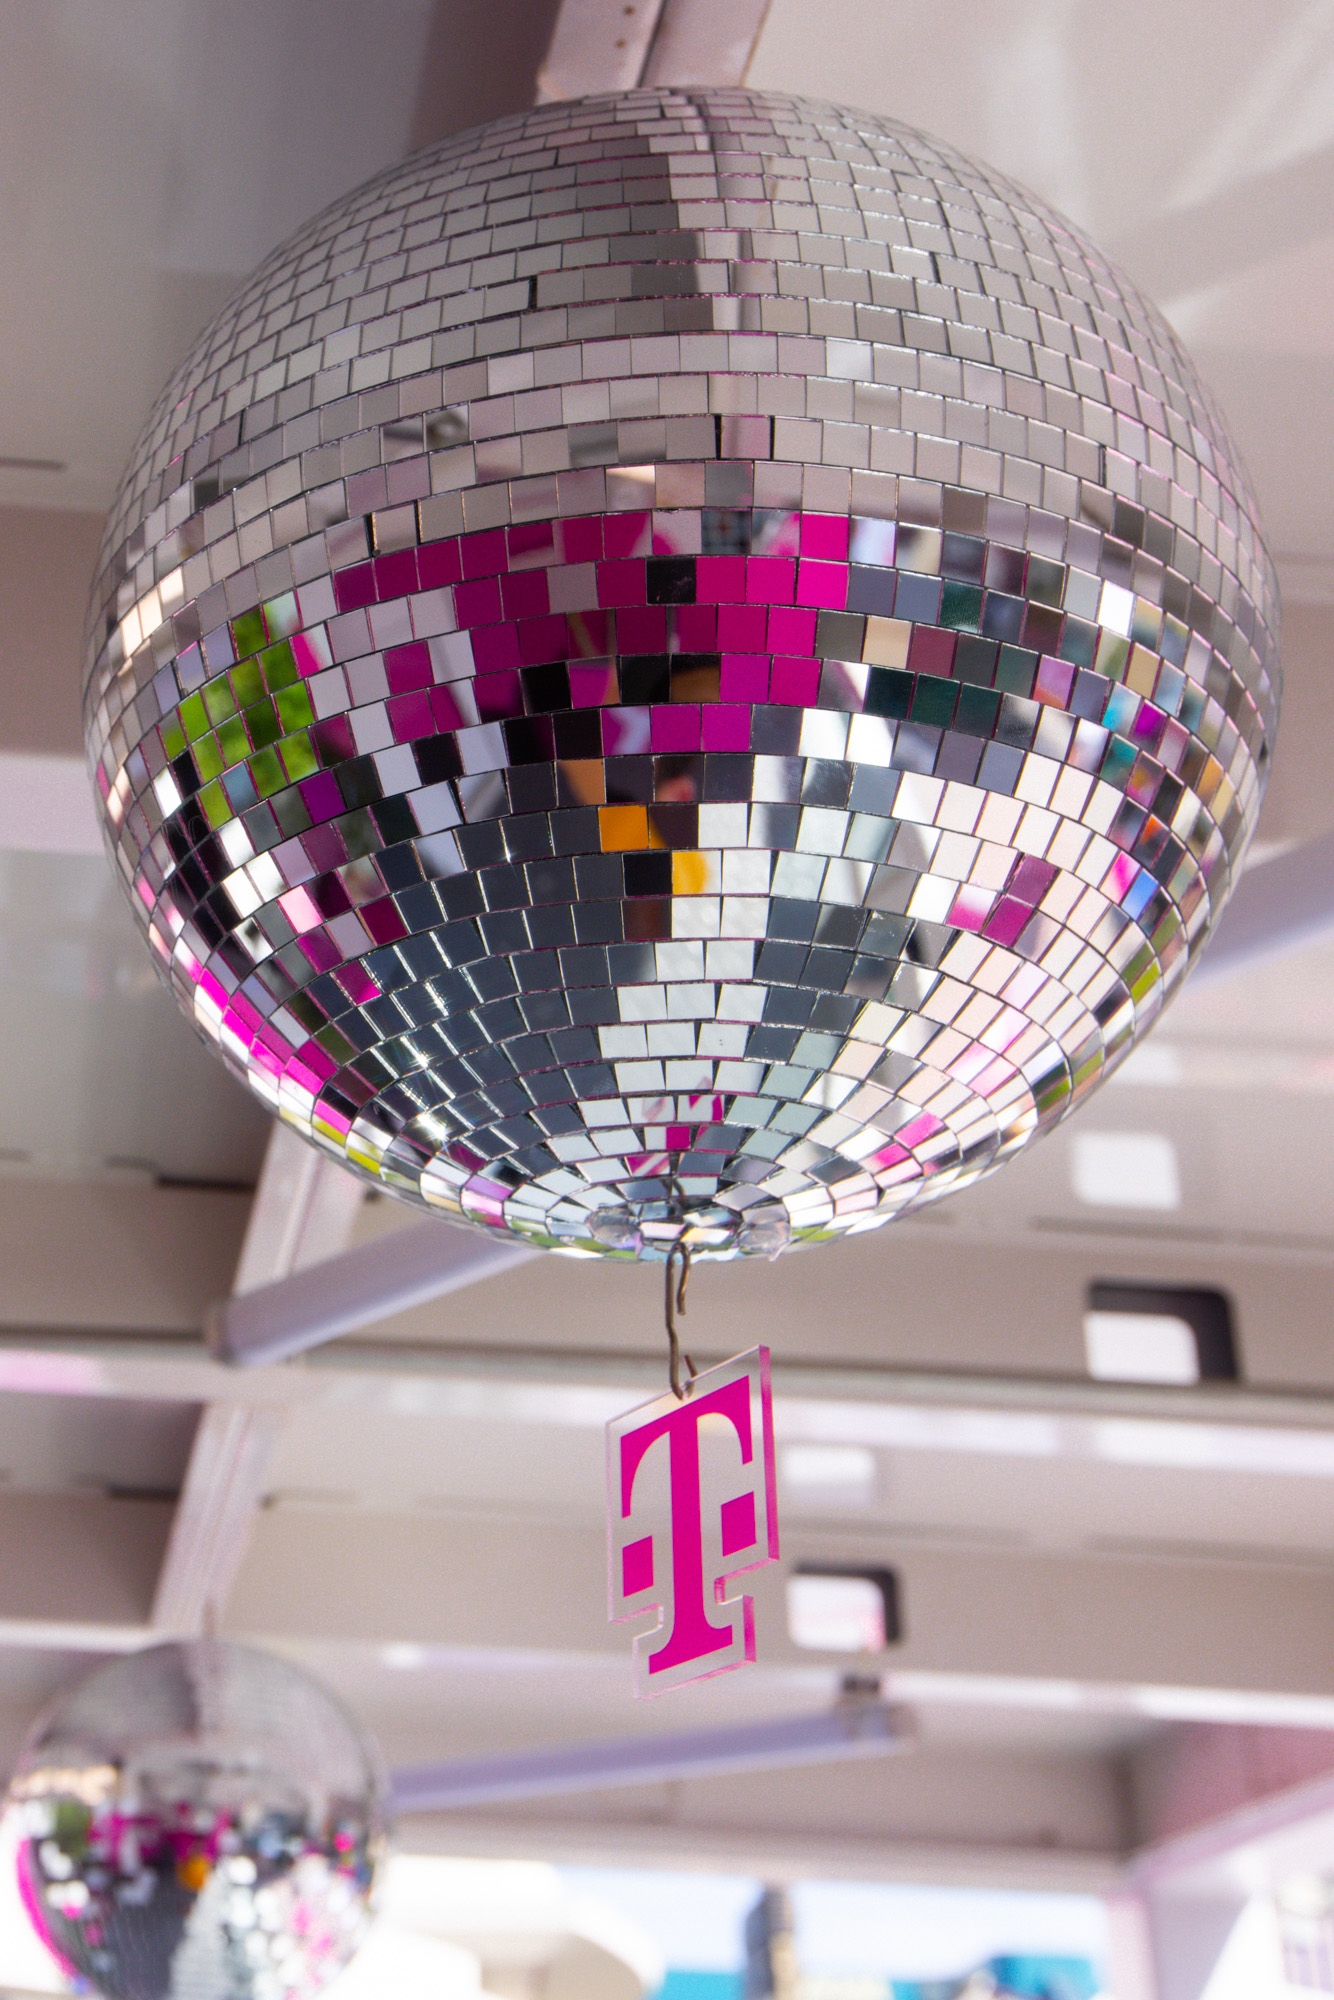 A close-up of a disco ball with the T-Digit logo underneath